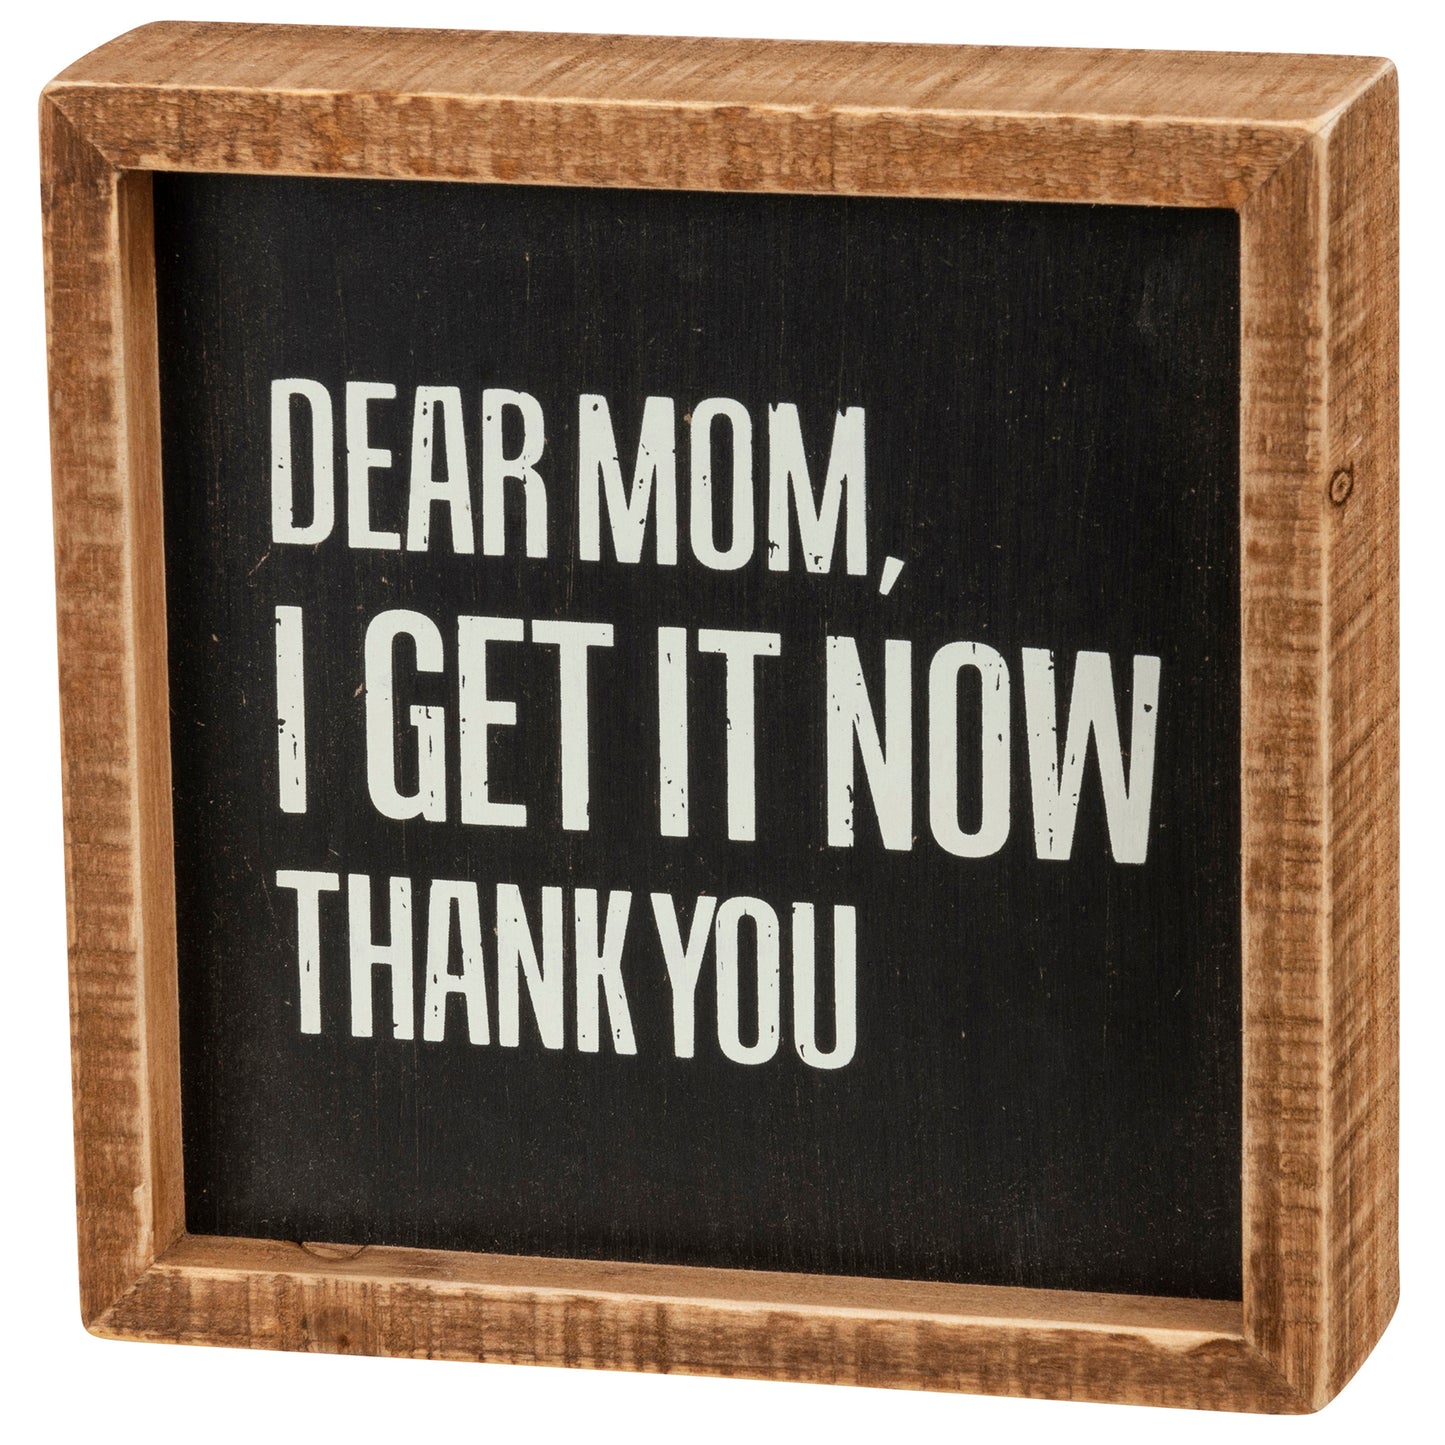 Inset Box Sign - Dear Mom I Get It Now